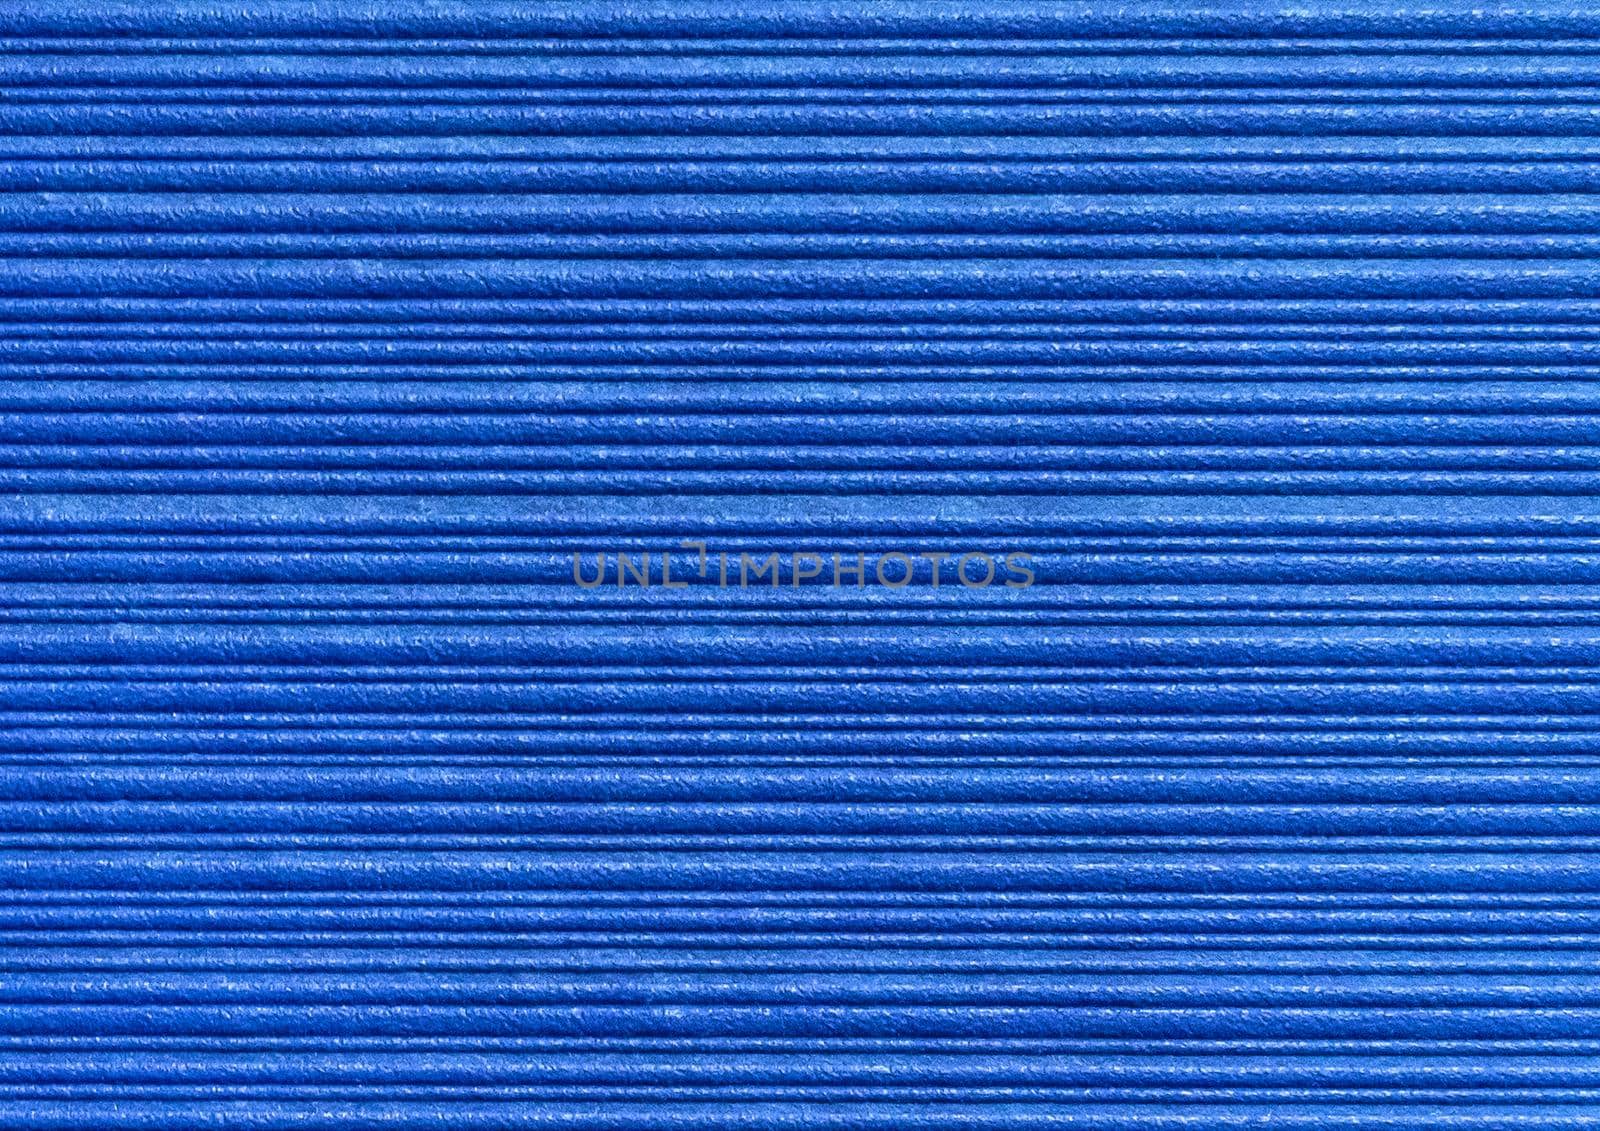 Blue abstract striped pattern wallpaper background, paper texture with horizontal lines.